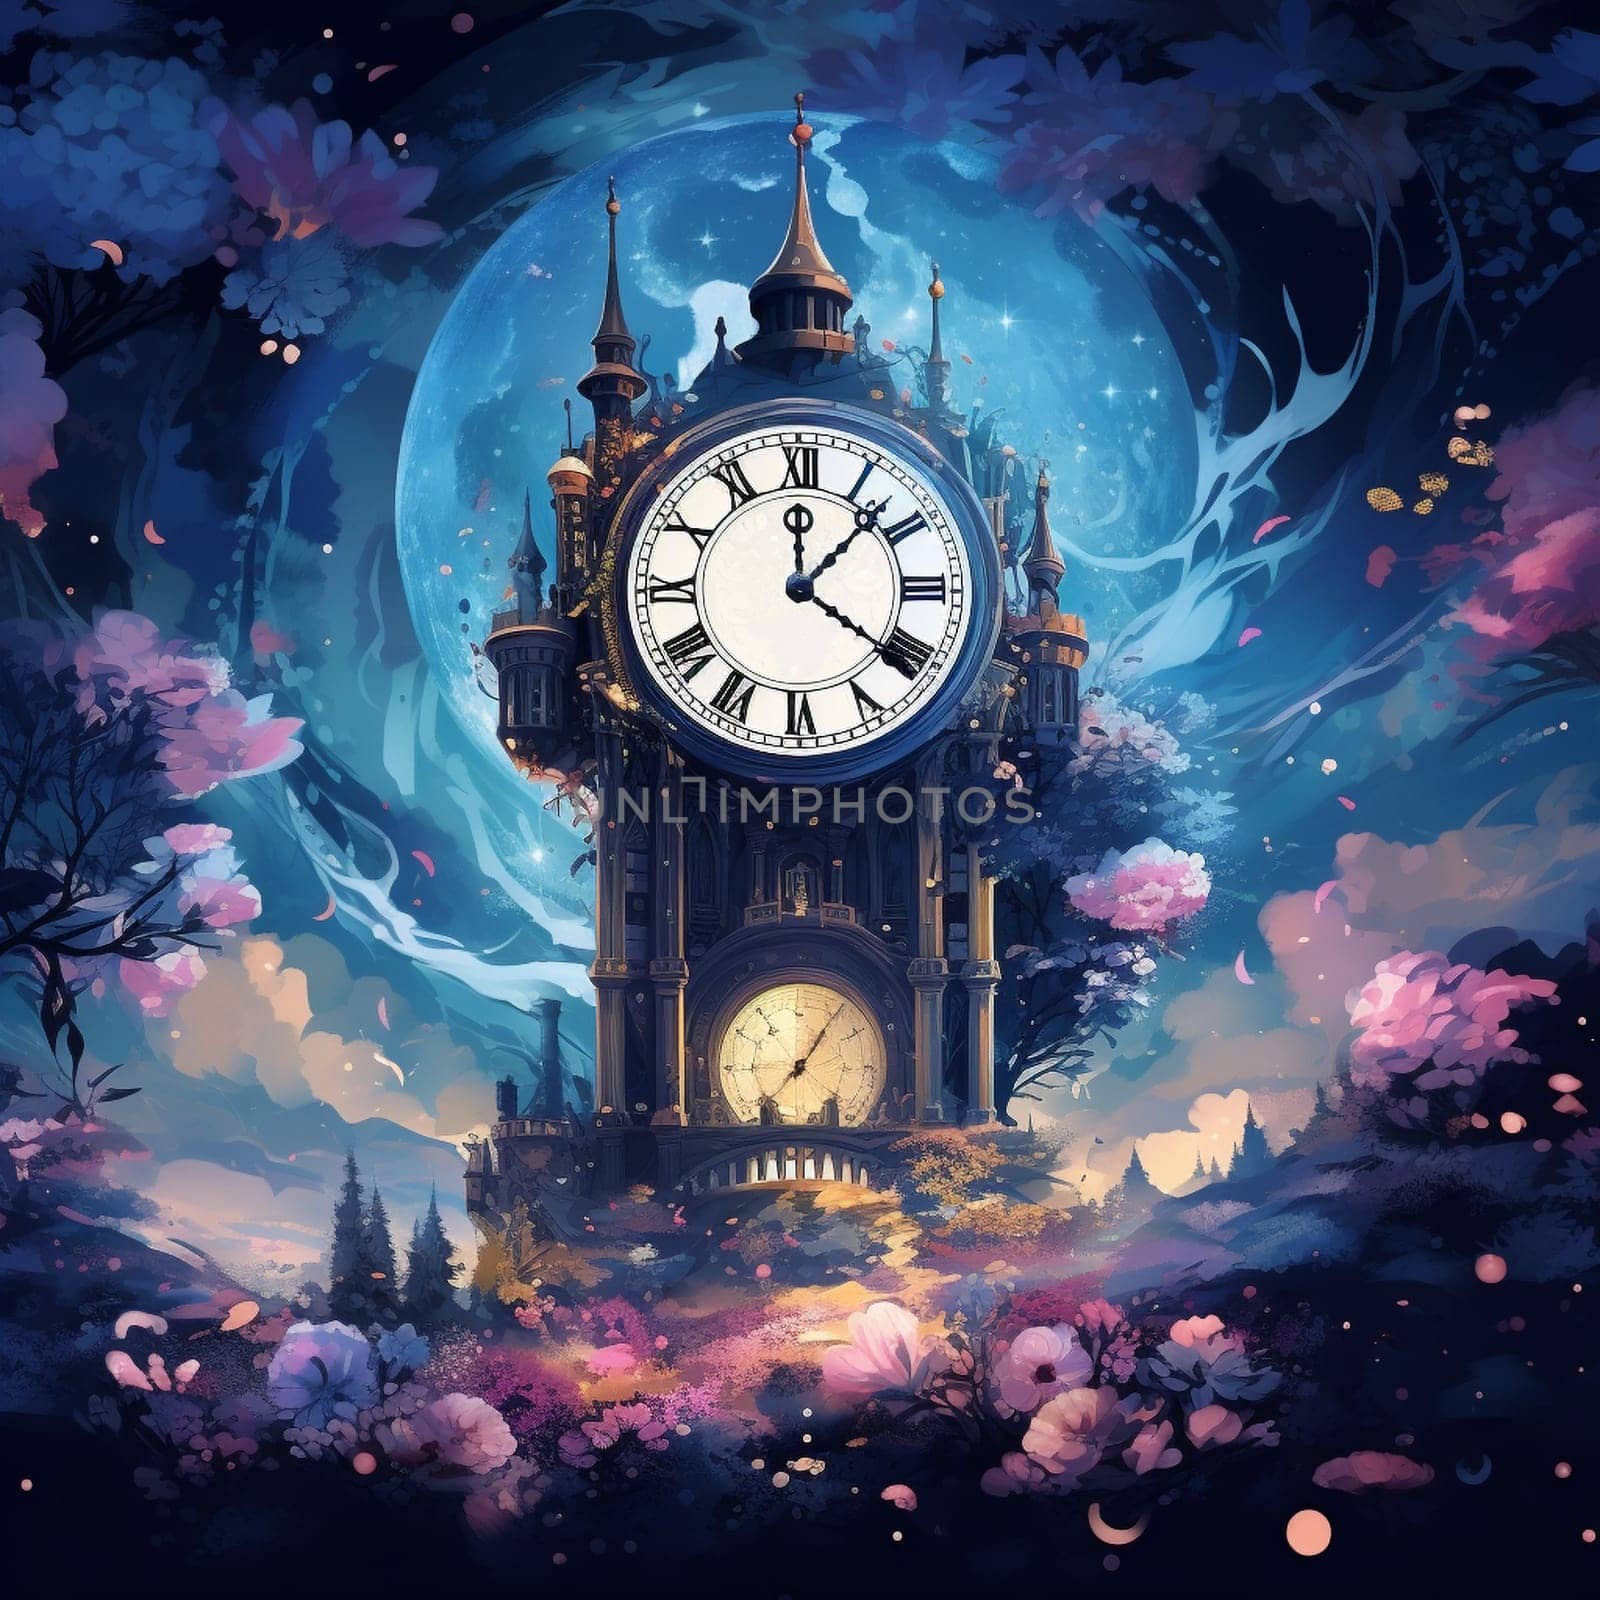 Step into a world of opulence and grandeur with this 1980s-inspired digital illustration. Immerse yourself in a lavish scene featuring a majestic Victorian-style clock tower surrounded by a sprawling garden. The tower, reminiscent of a bygone era, stands tall and proud, capturing the essence of an extravagant time. The hands of the clock point to a significant moment, frozen in time for eternity. With its intricate details and unique designs, each vintage clock adds to the allure of the composition. The vibrant and rich colors transport you back to a golden era, evoking a sense of nostalgia, fascination, and awe. This captivating artwork is a perfect fit for microstock sites searching for remarkable vintage-themed illustrations.